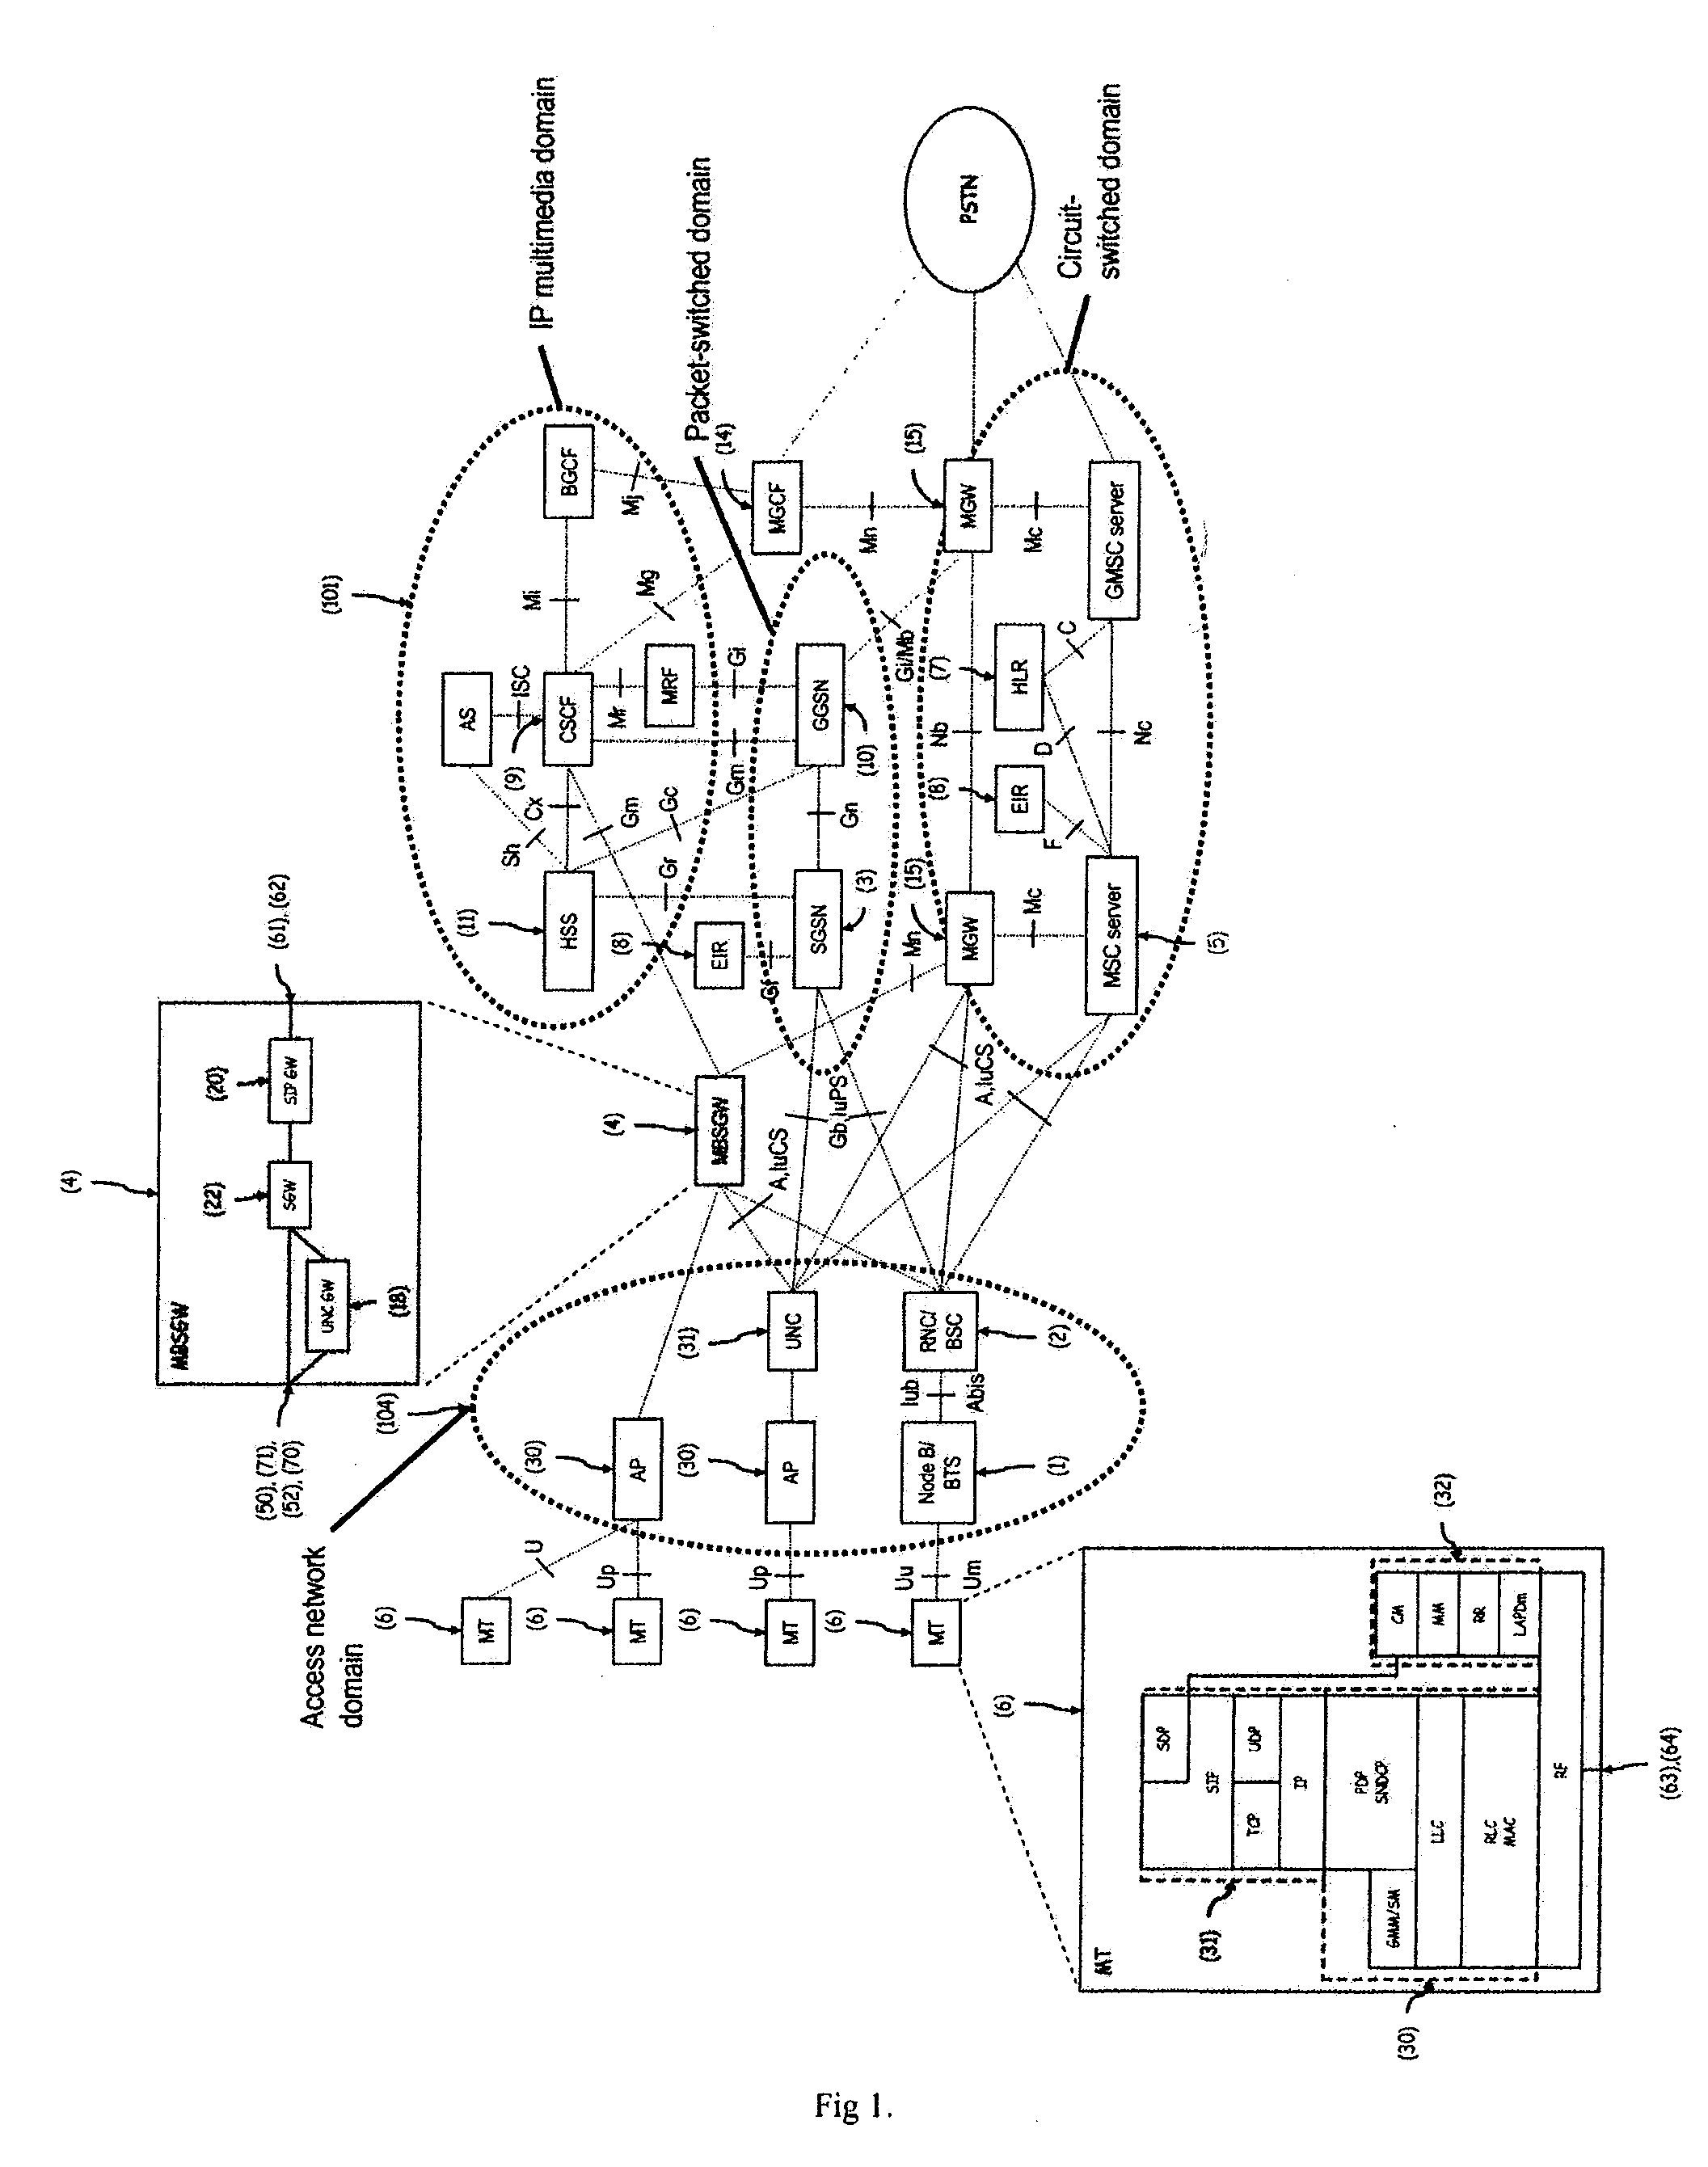 Use of wireless circuit-switched connections for transferring information requiring real-time operation of packet-switched multimedia services